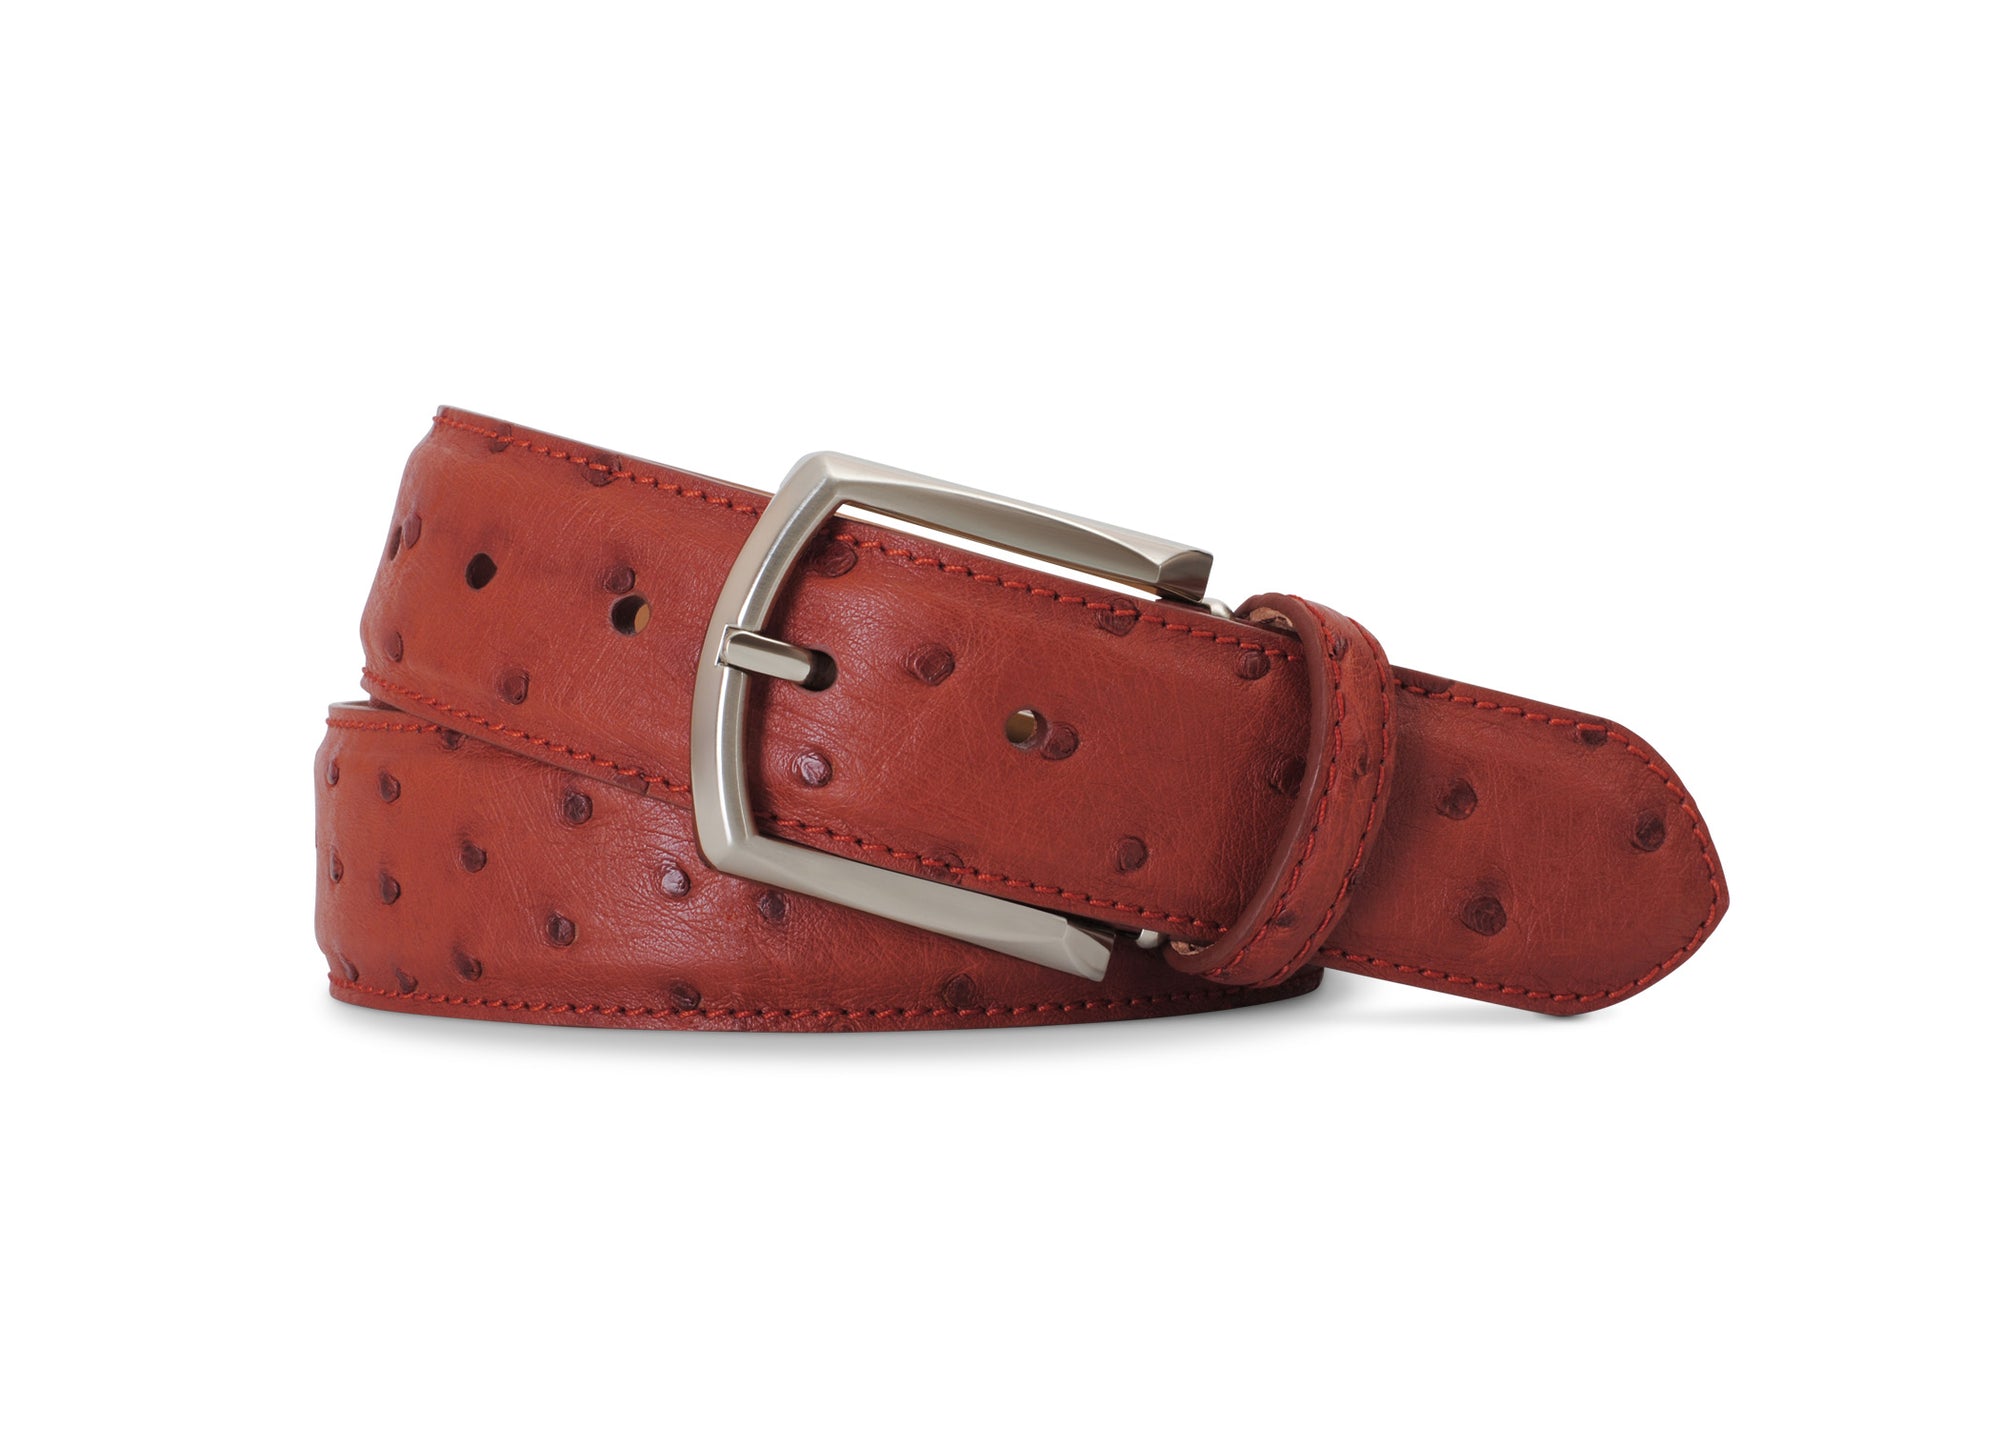 Ostrich Quill Belt in Cognac by Brookes & Hyde